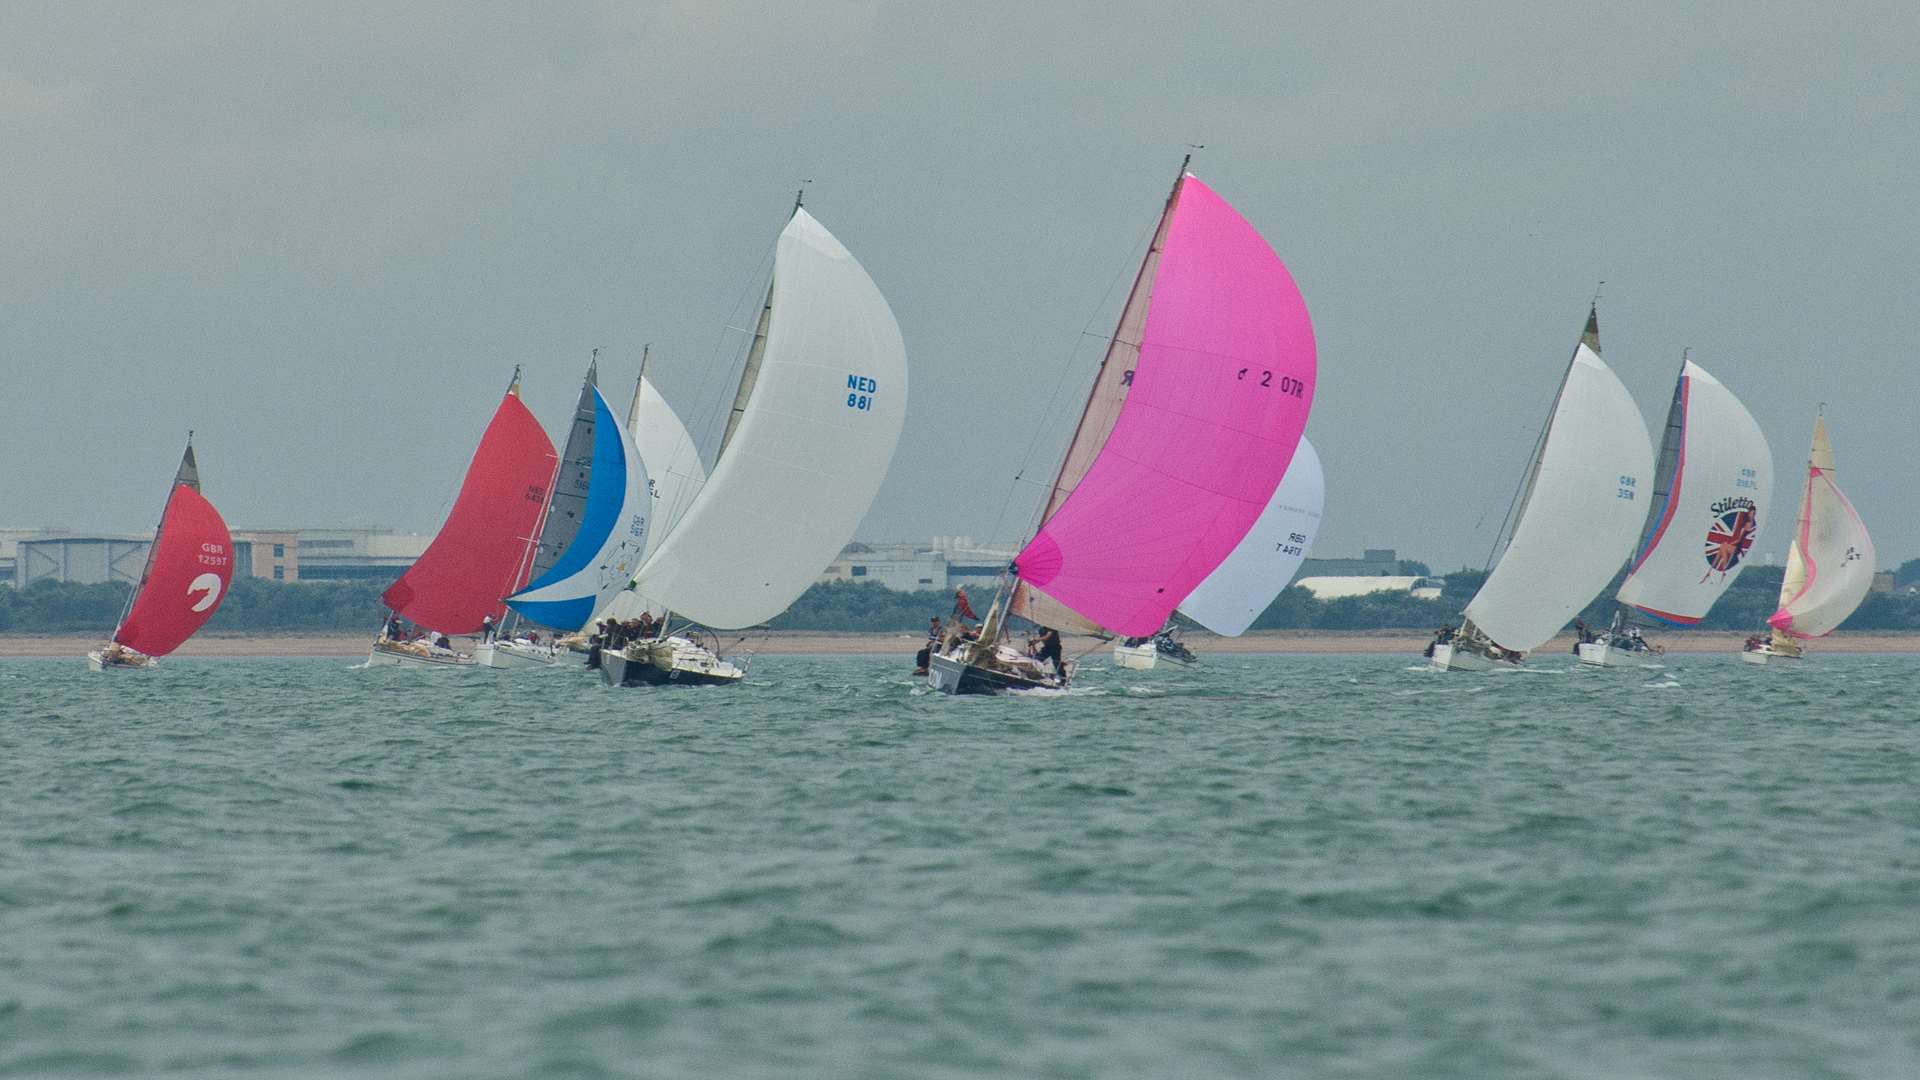 Ramsgate Week takes place in late July